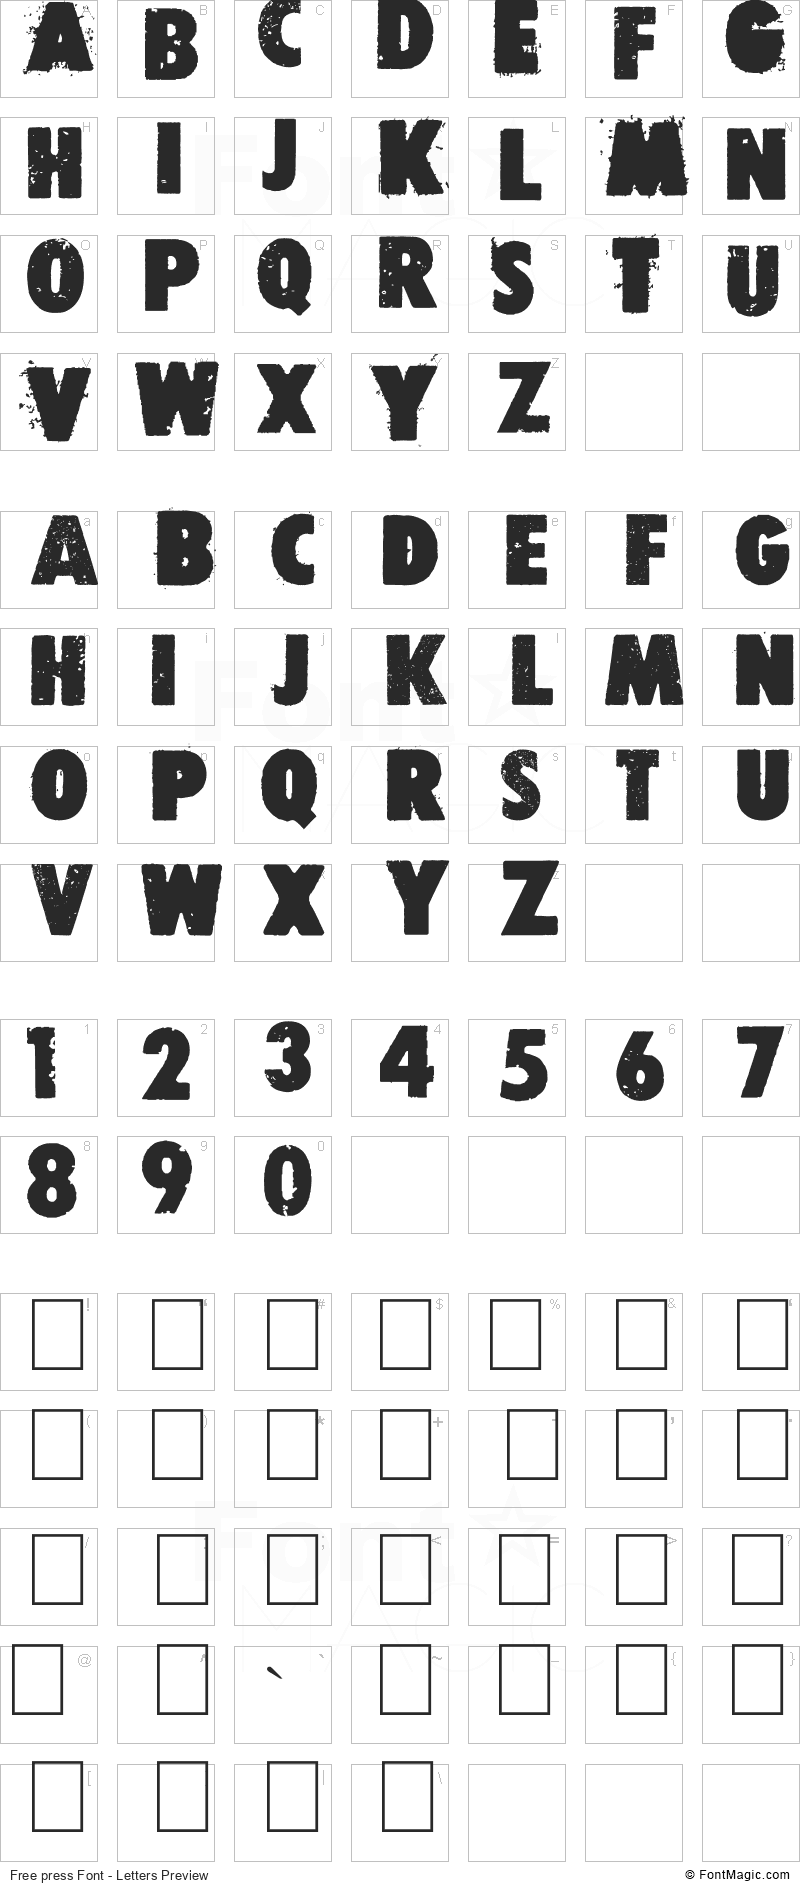 Free press Font - All Latters Preview Chart